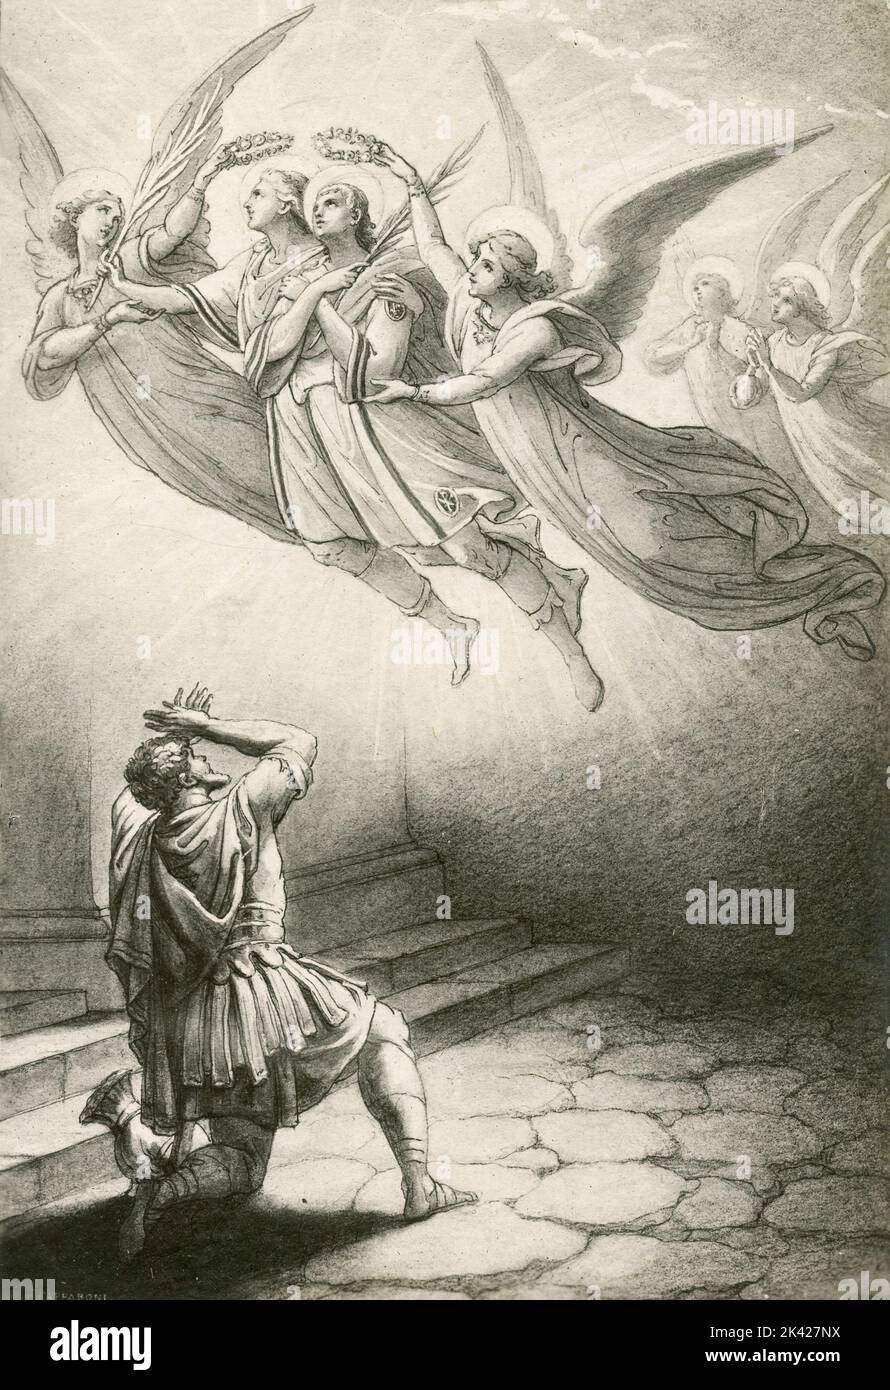 Roman centurion and two christian martirs taken in heaven by saints, painting by Italian artist Silverio Capparoni, 1870s Stock Photo